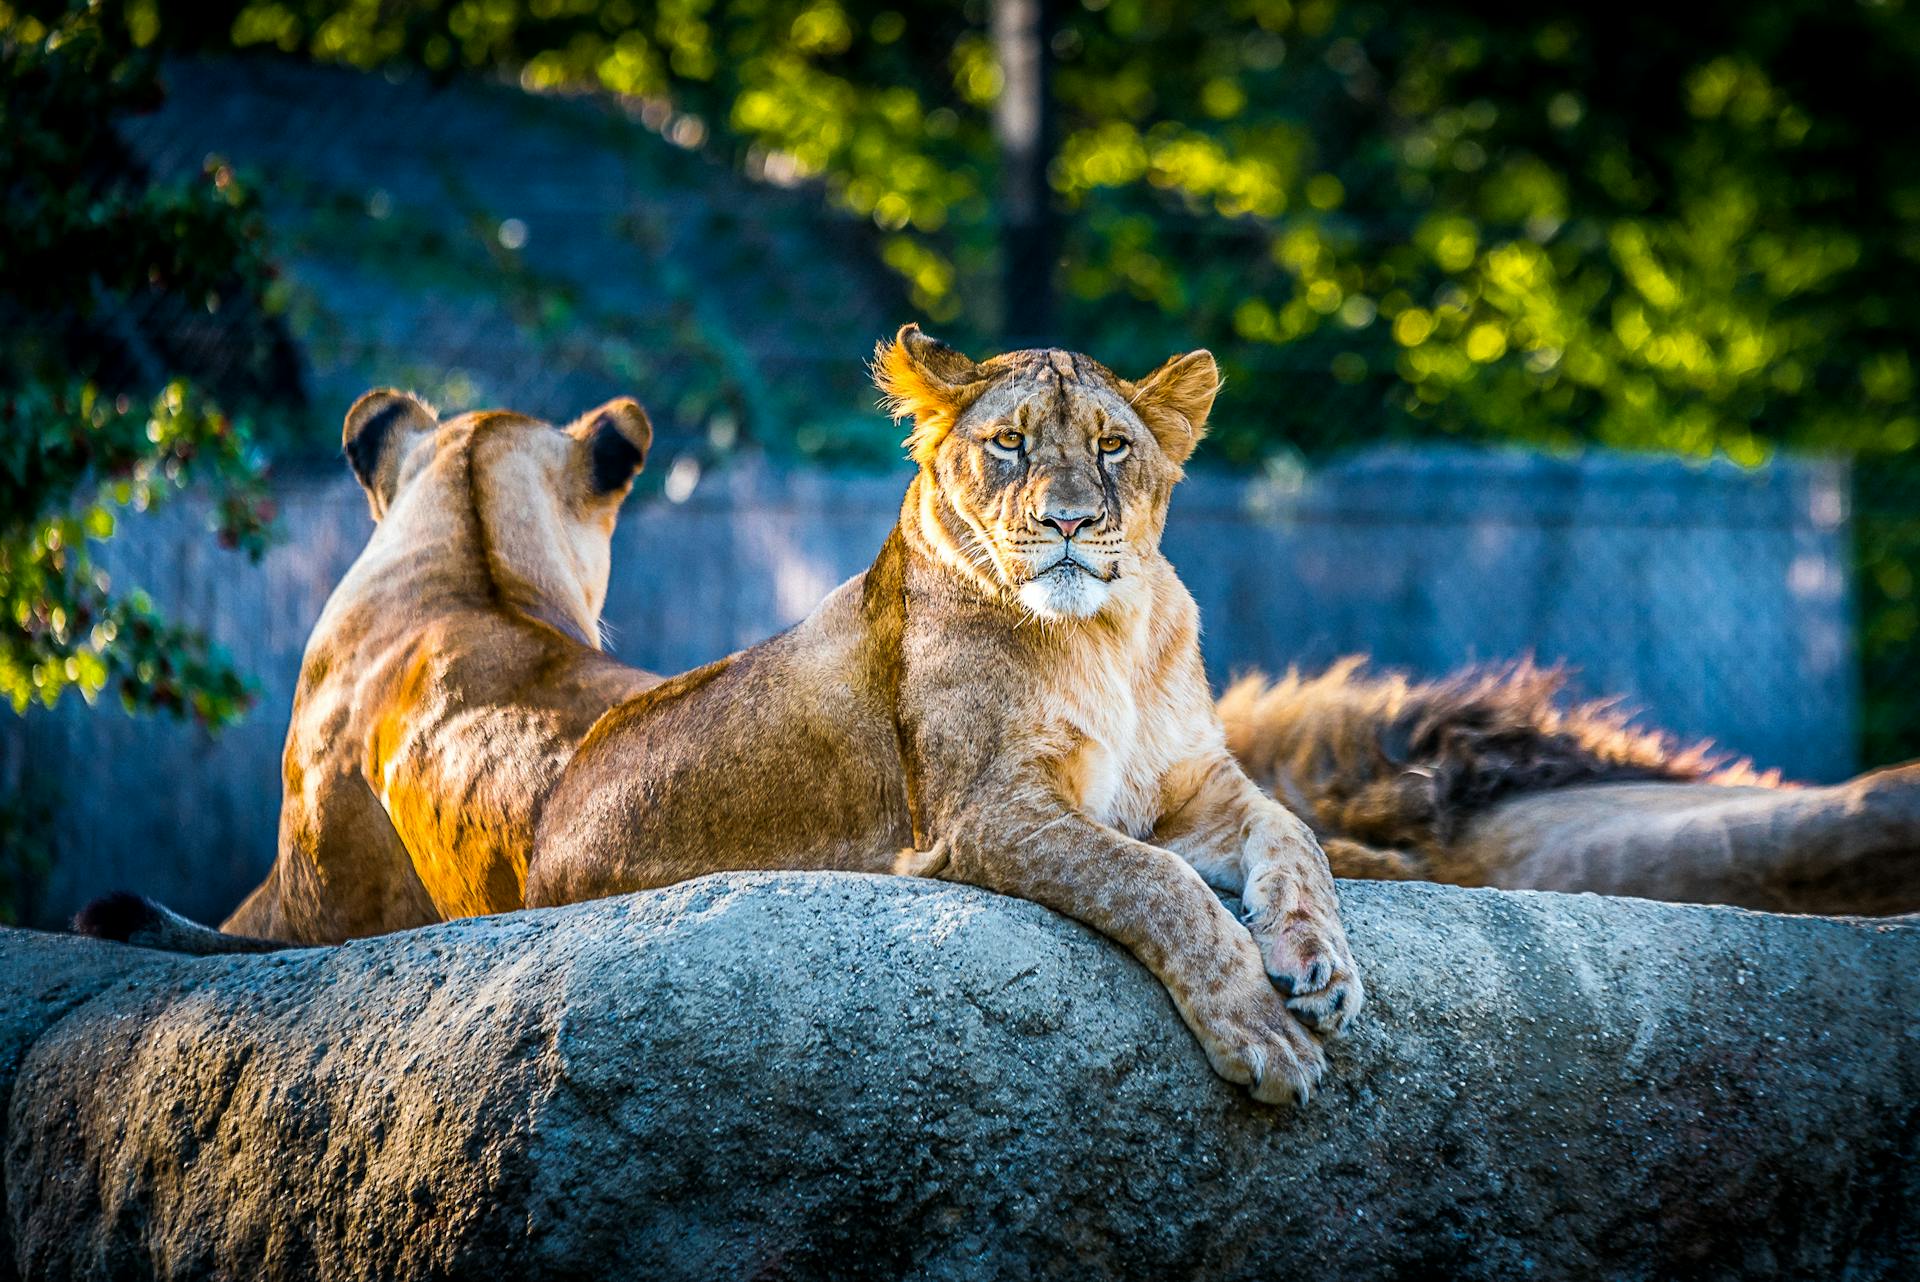 Discover the Tulsa Zoo on your next visit